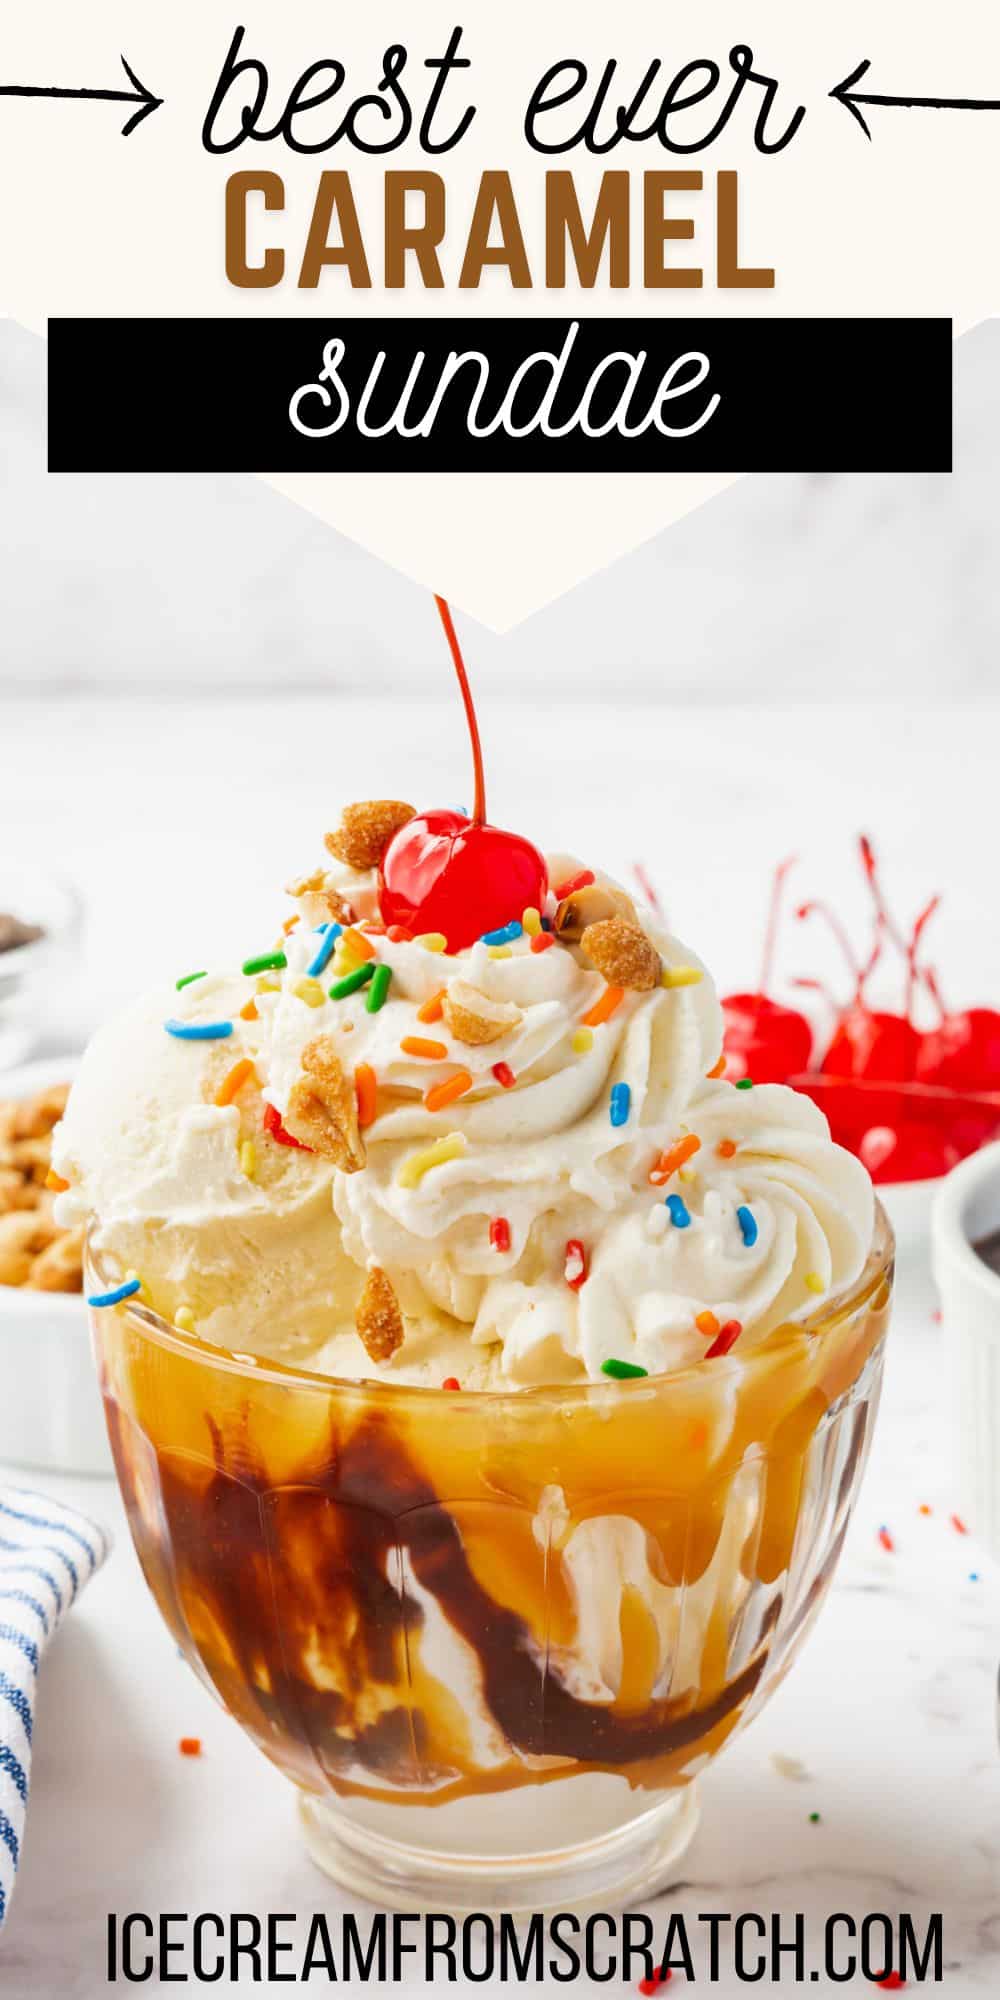 a glass sundae dish filled with a caramel sundae topped with whipped cream, sprinkles, and a cherry. Text at top of photo says "best ever caramel sundae" in varied text